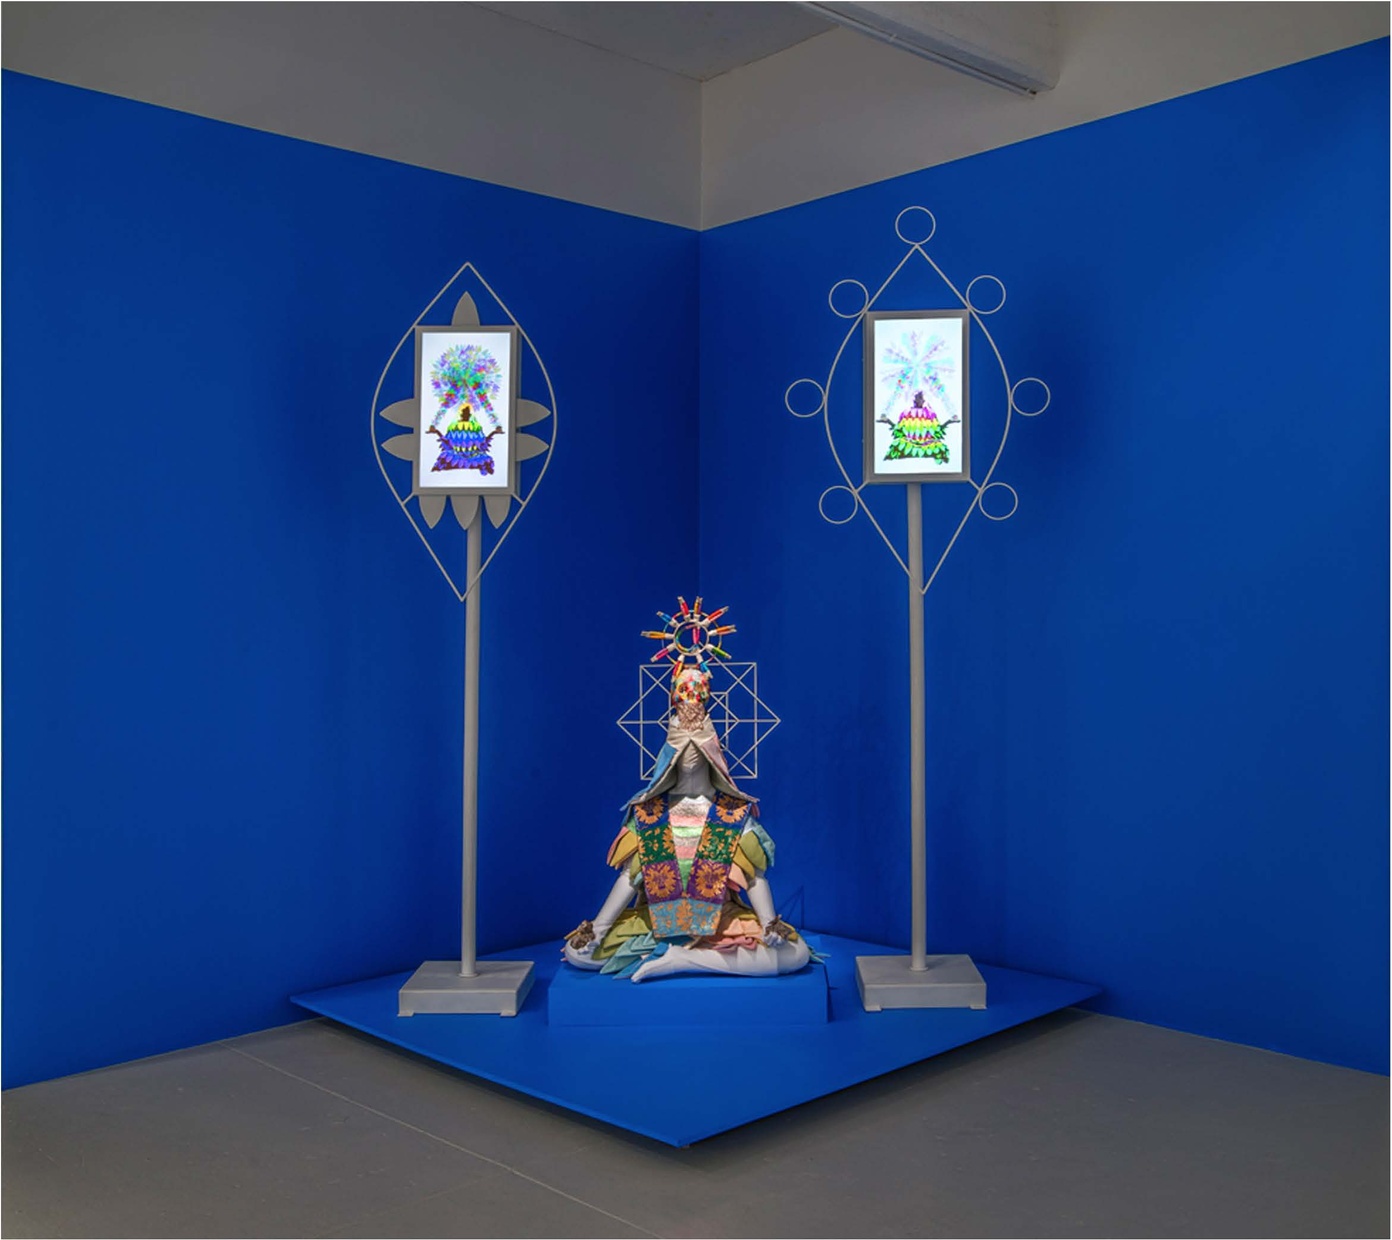 A humanoid figure in a colorful, petal-like robe and star-like headdress sits crosslegged on a blue platform flanked by two gray stands holding drawings of similar figures as the seated one.